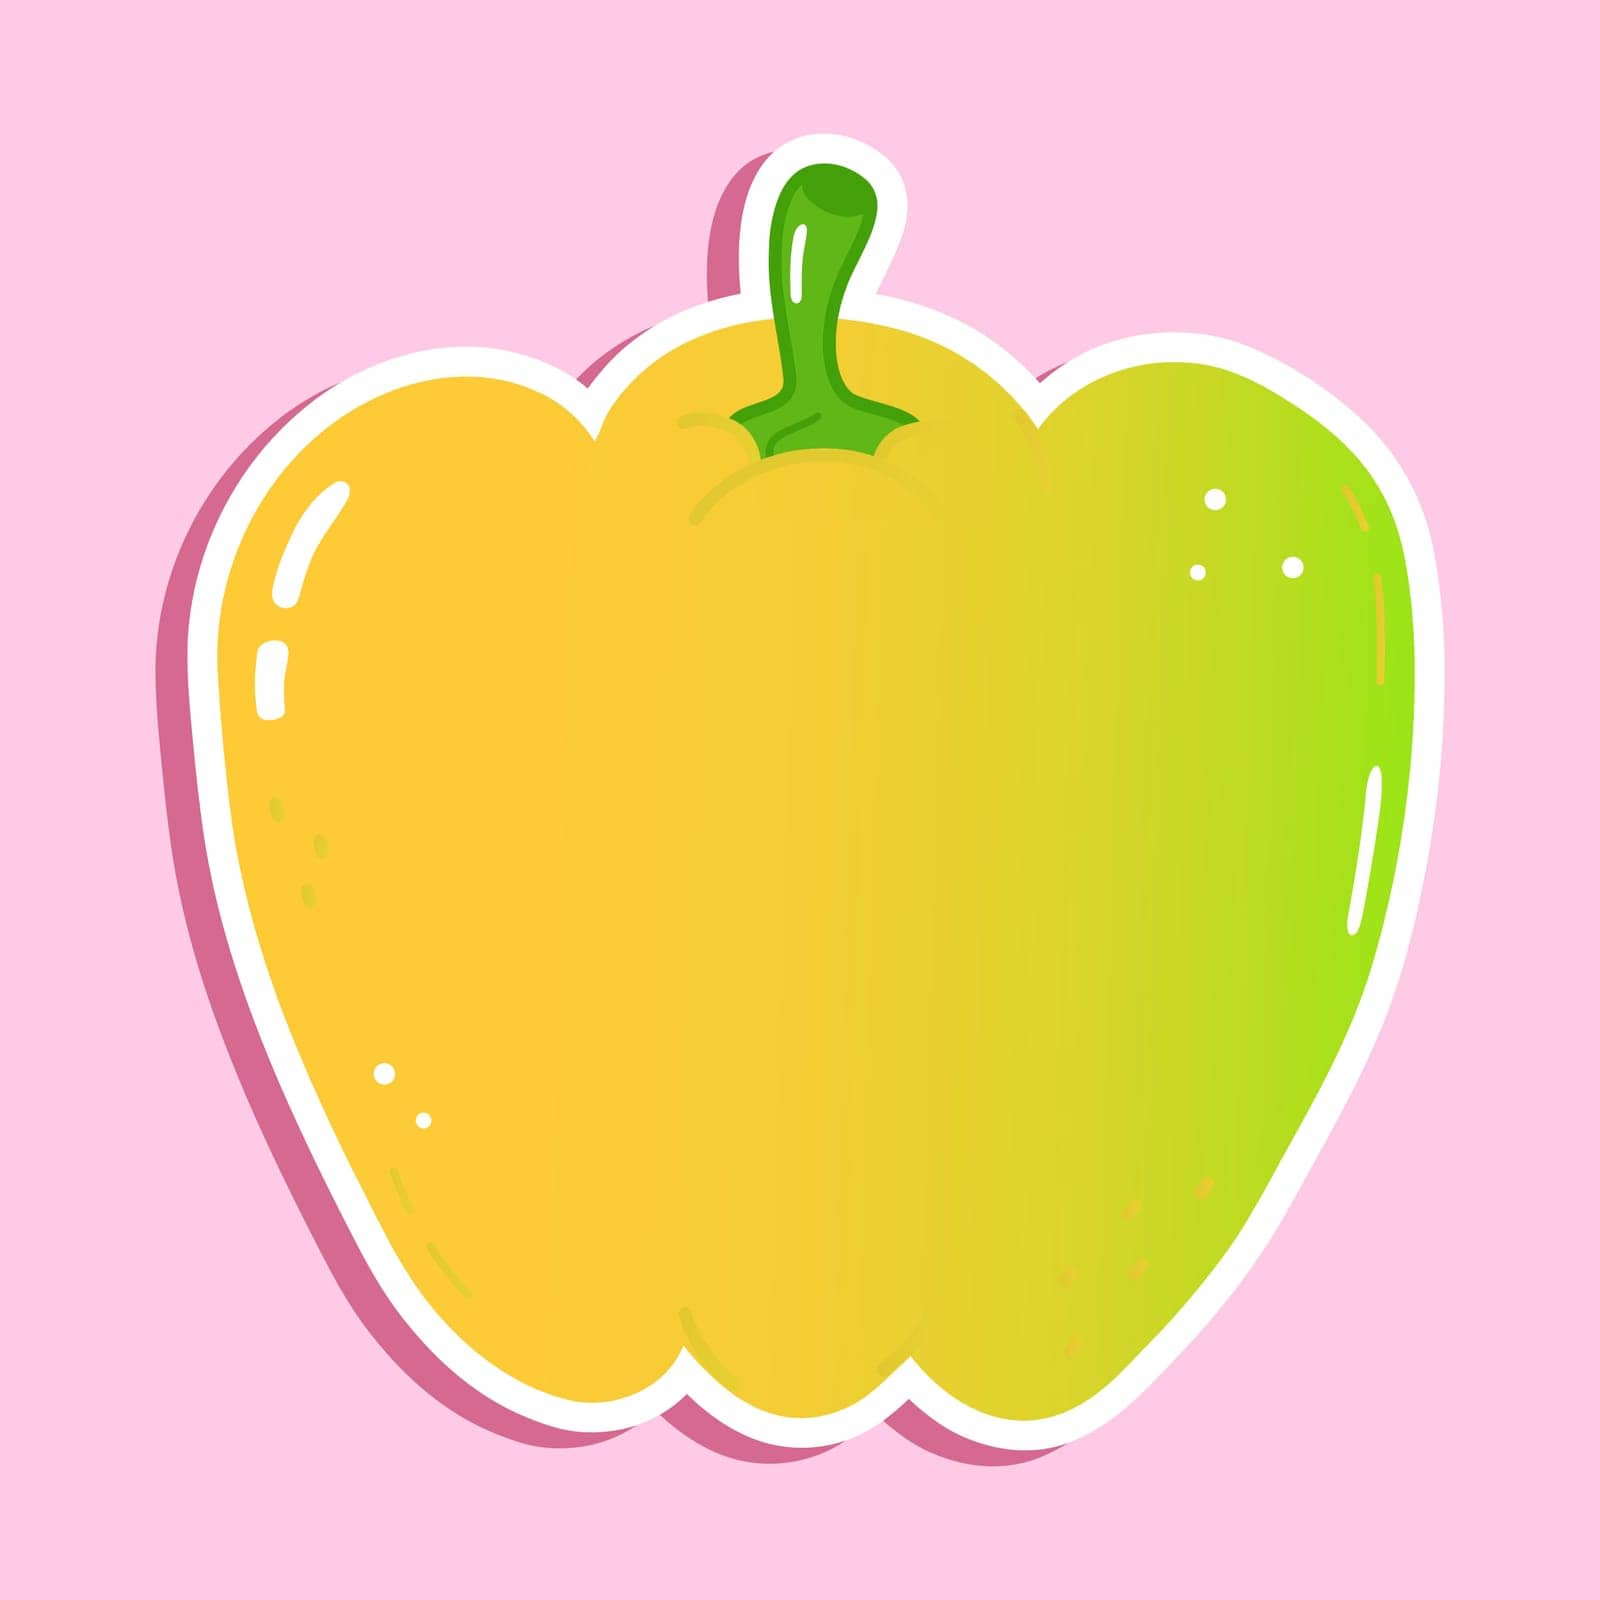 Cute funny colored bell pepper sticker character. Vector hand drawn cartoon kawaii character illustration icon. Isolated on pink background. Colored bell pepper character concept by Caspian